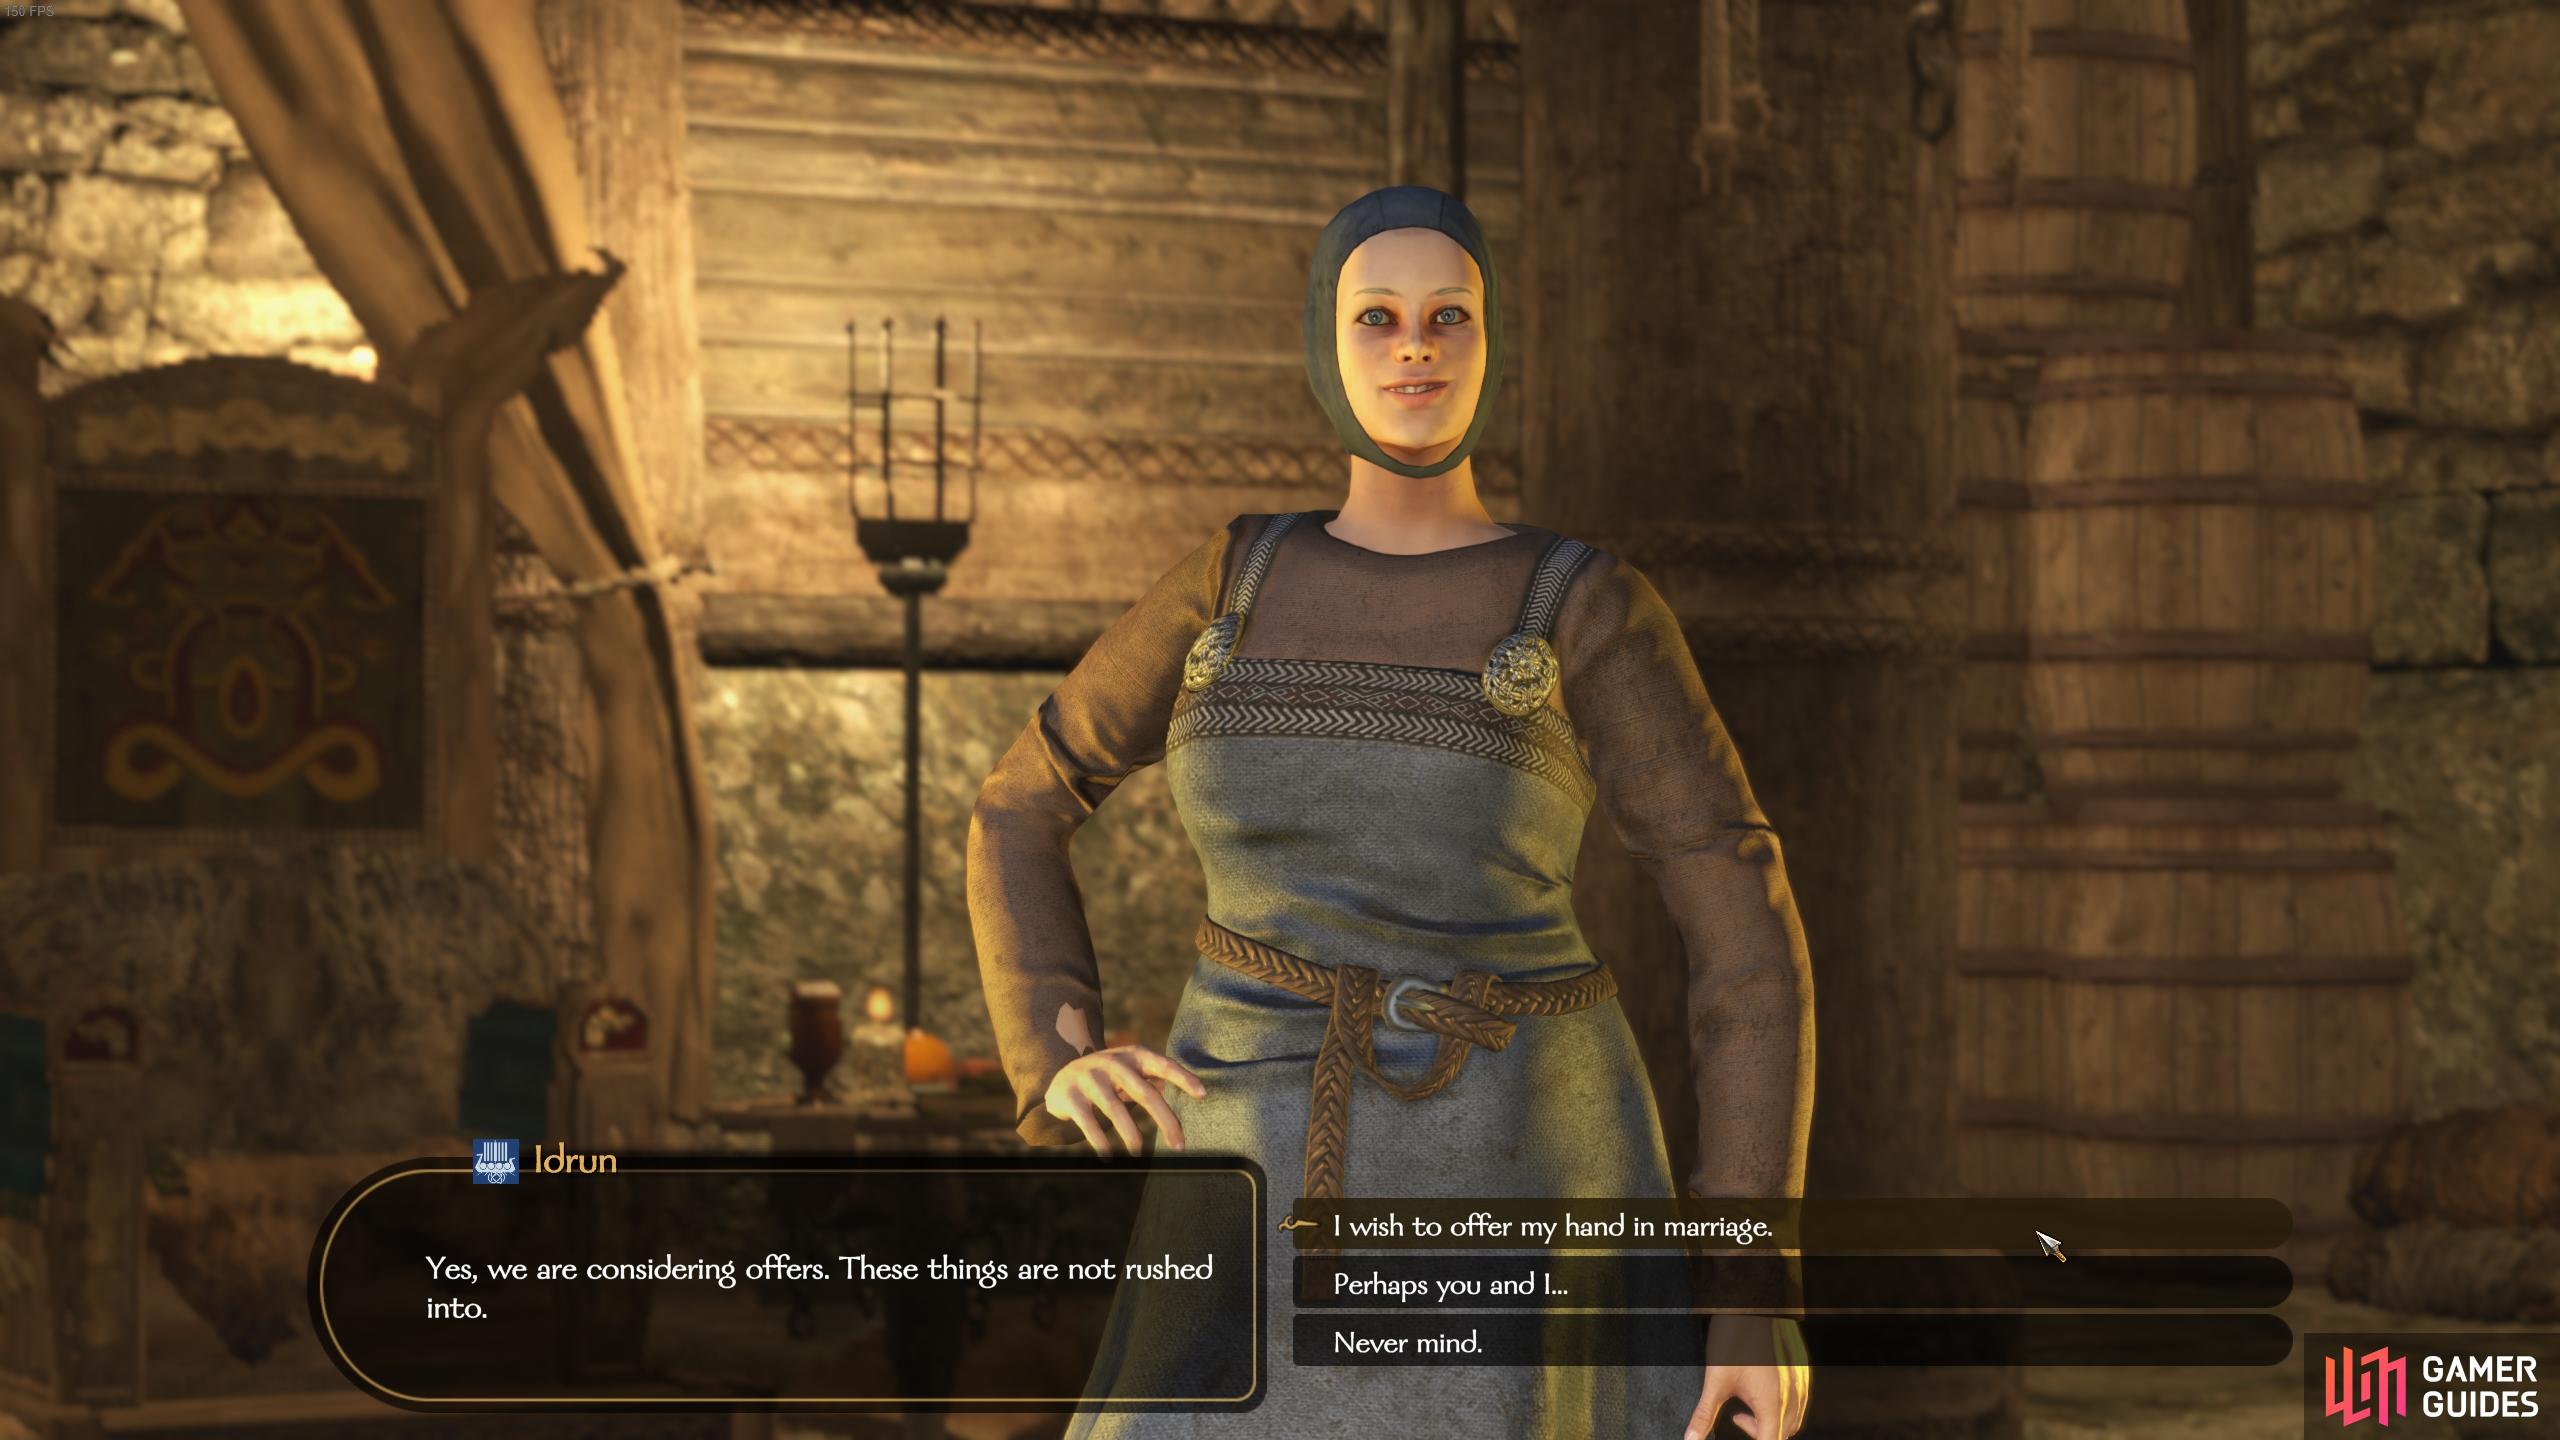 You can offer marriage directly or indirectly, either dialogue option works.